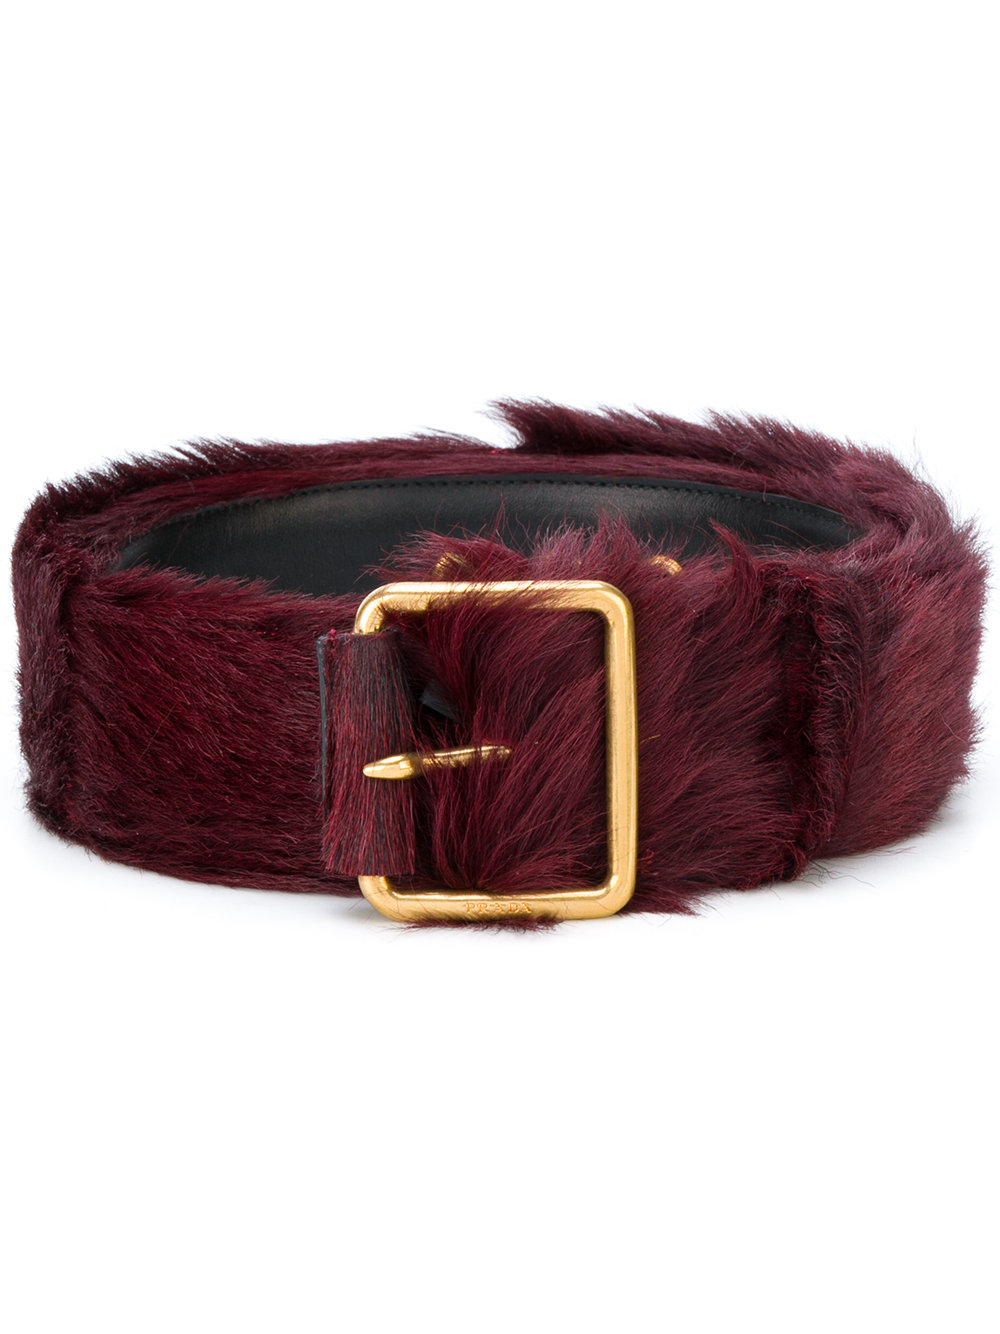 THE | BOUTIQUE UNTITLED BELTS